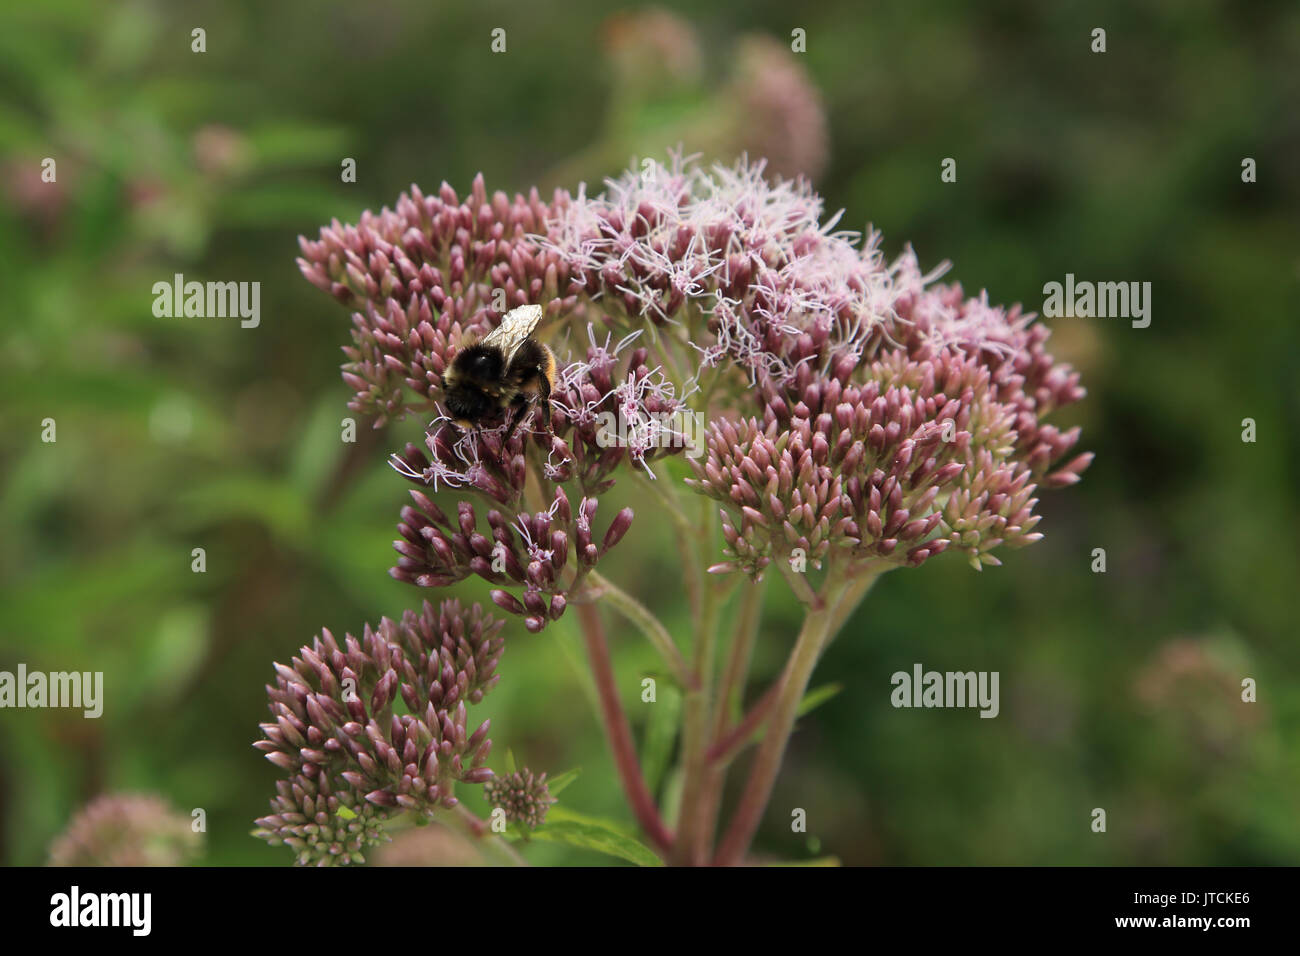 Bee on flower head in Jardin des Plantes, Amiens, France Stock Photo